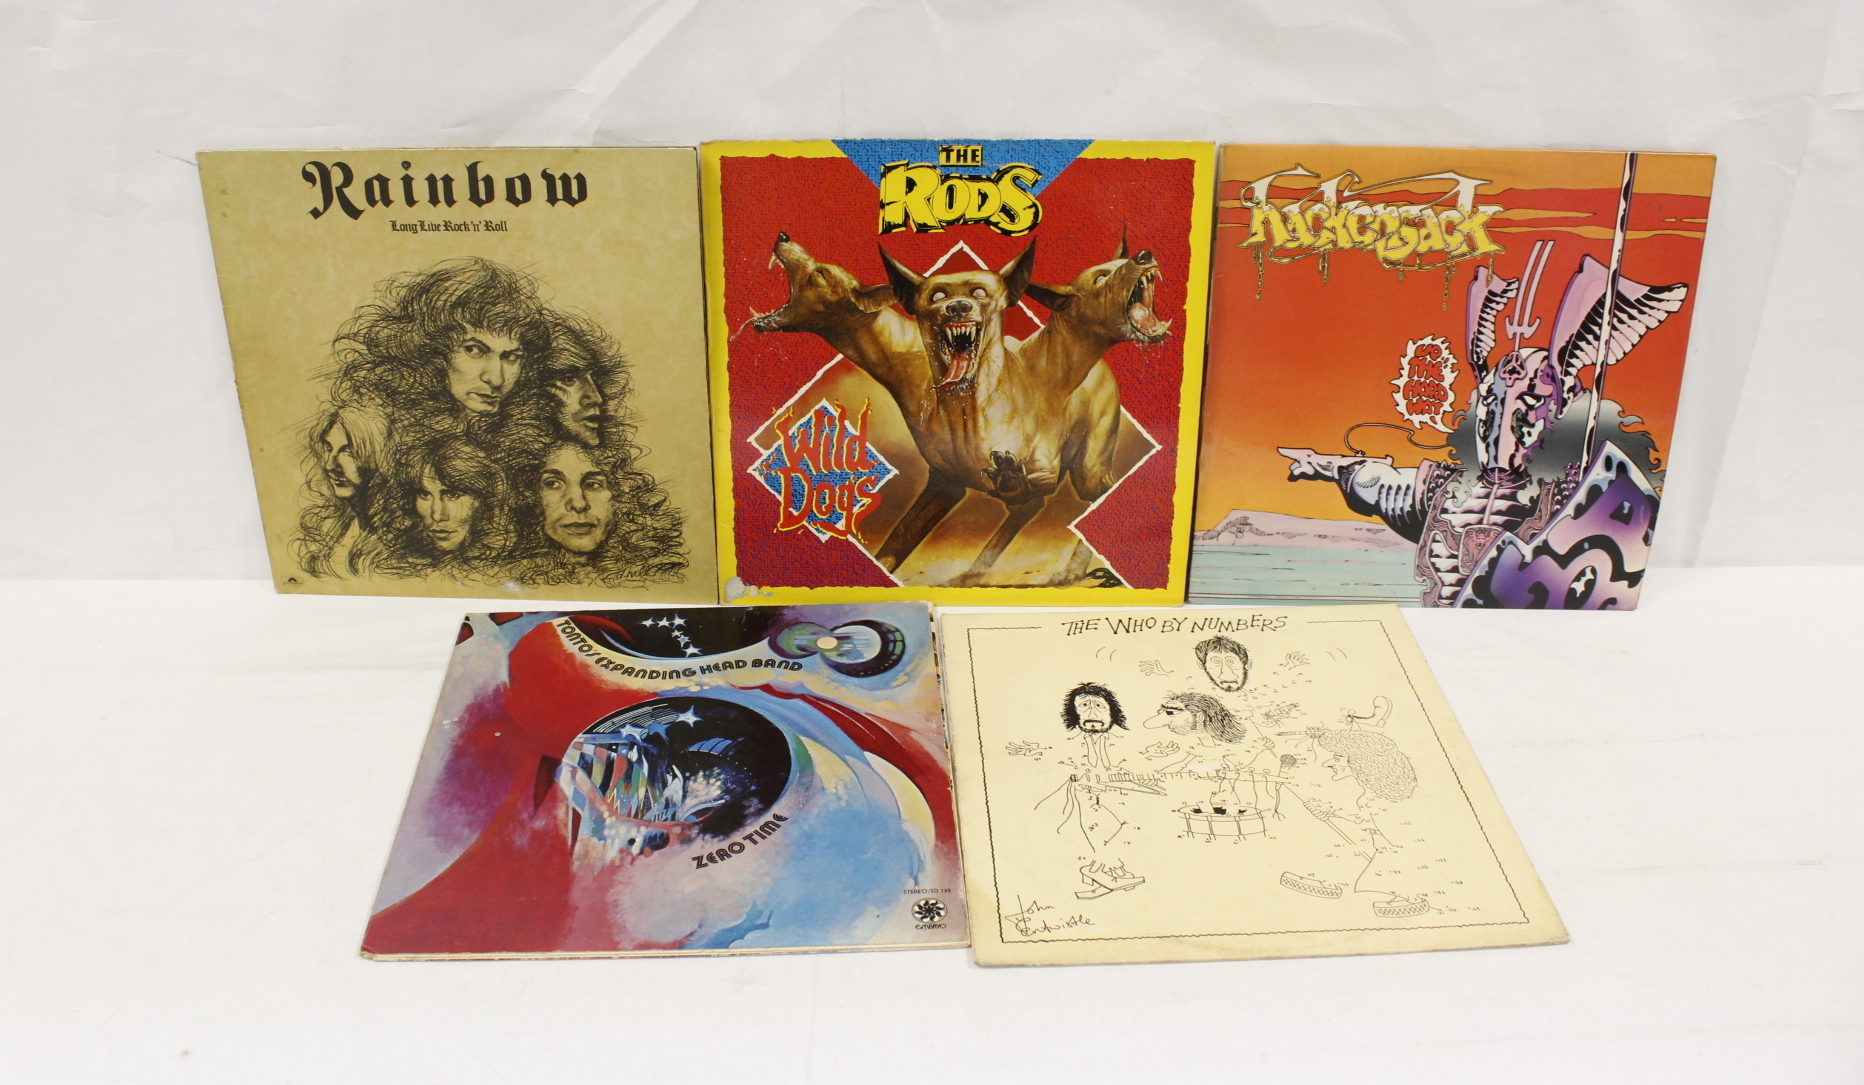 Collection of Rock related LPs to include The Who, 'By Numbers', Soft Machine, Hackensack and The